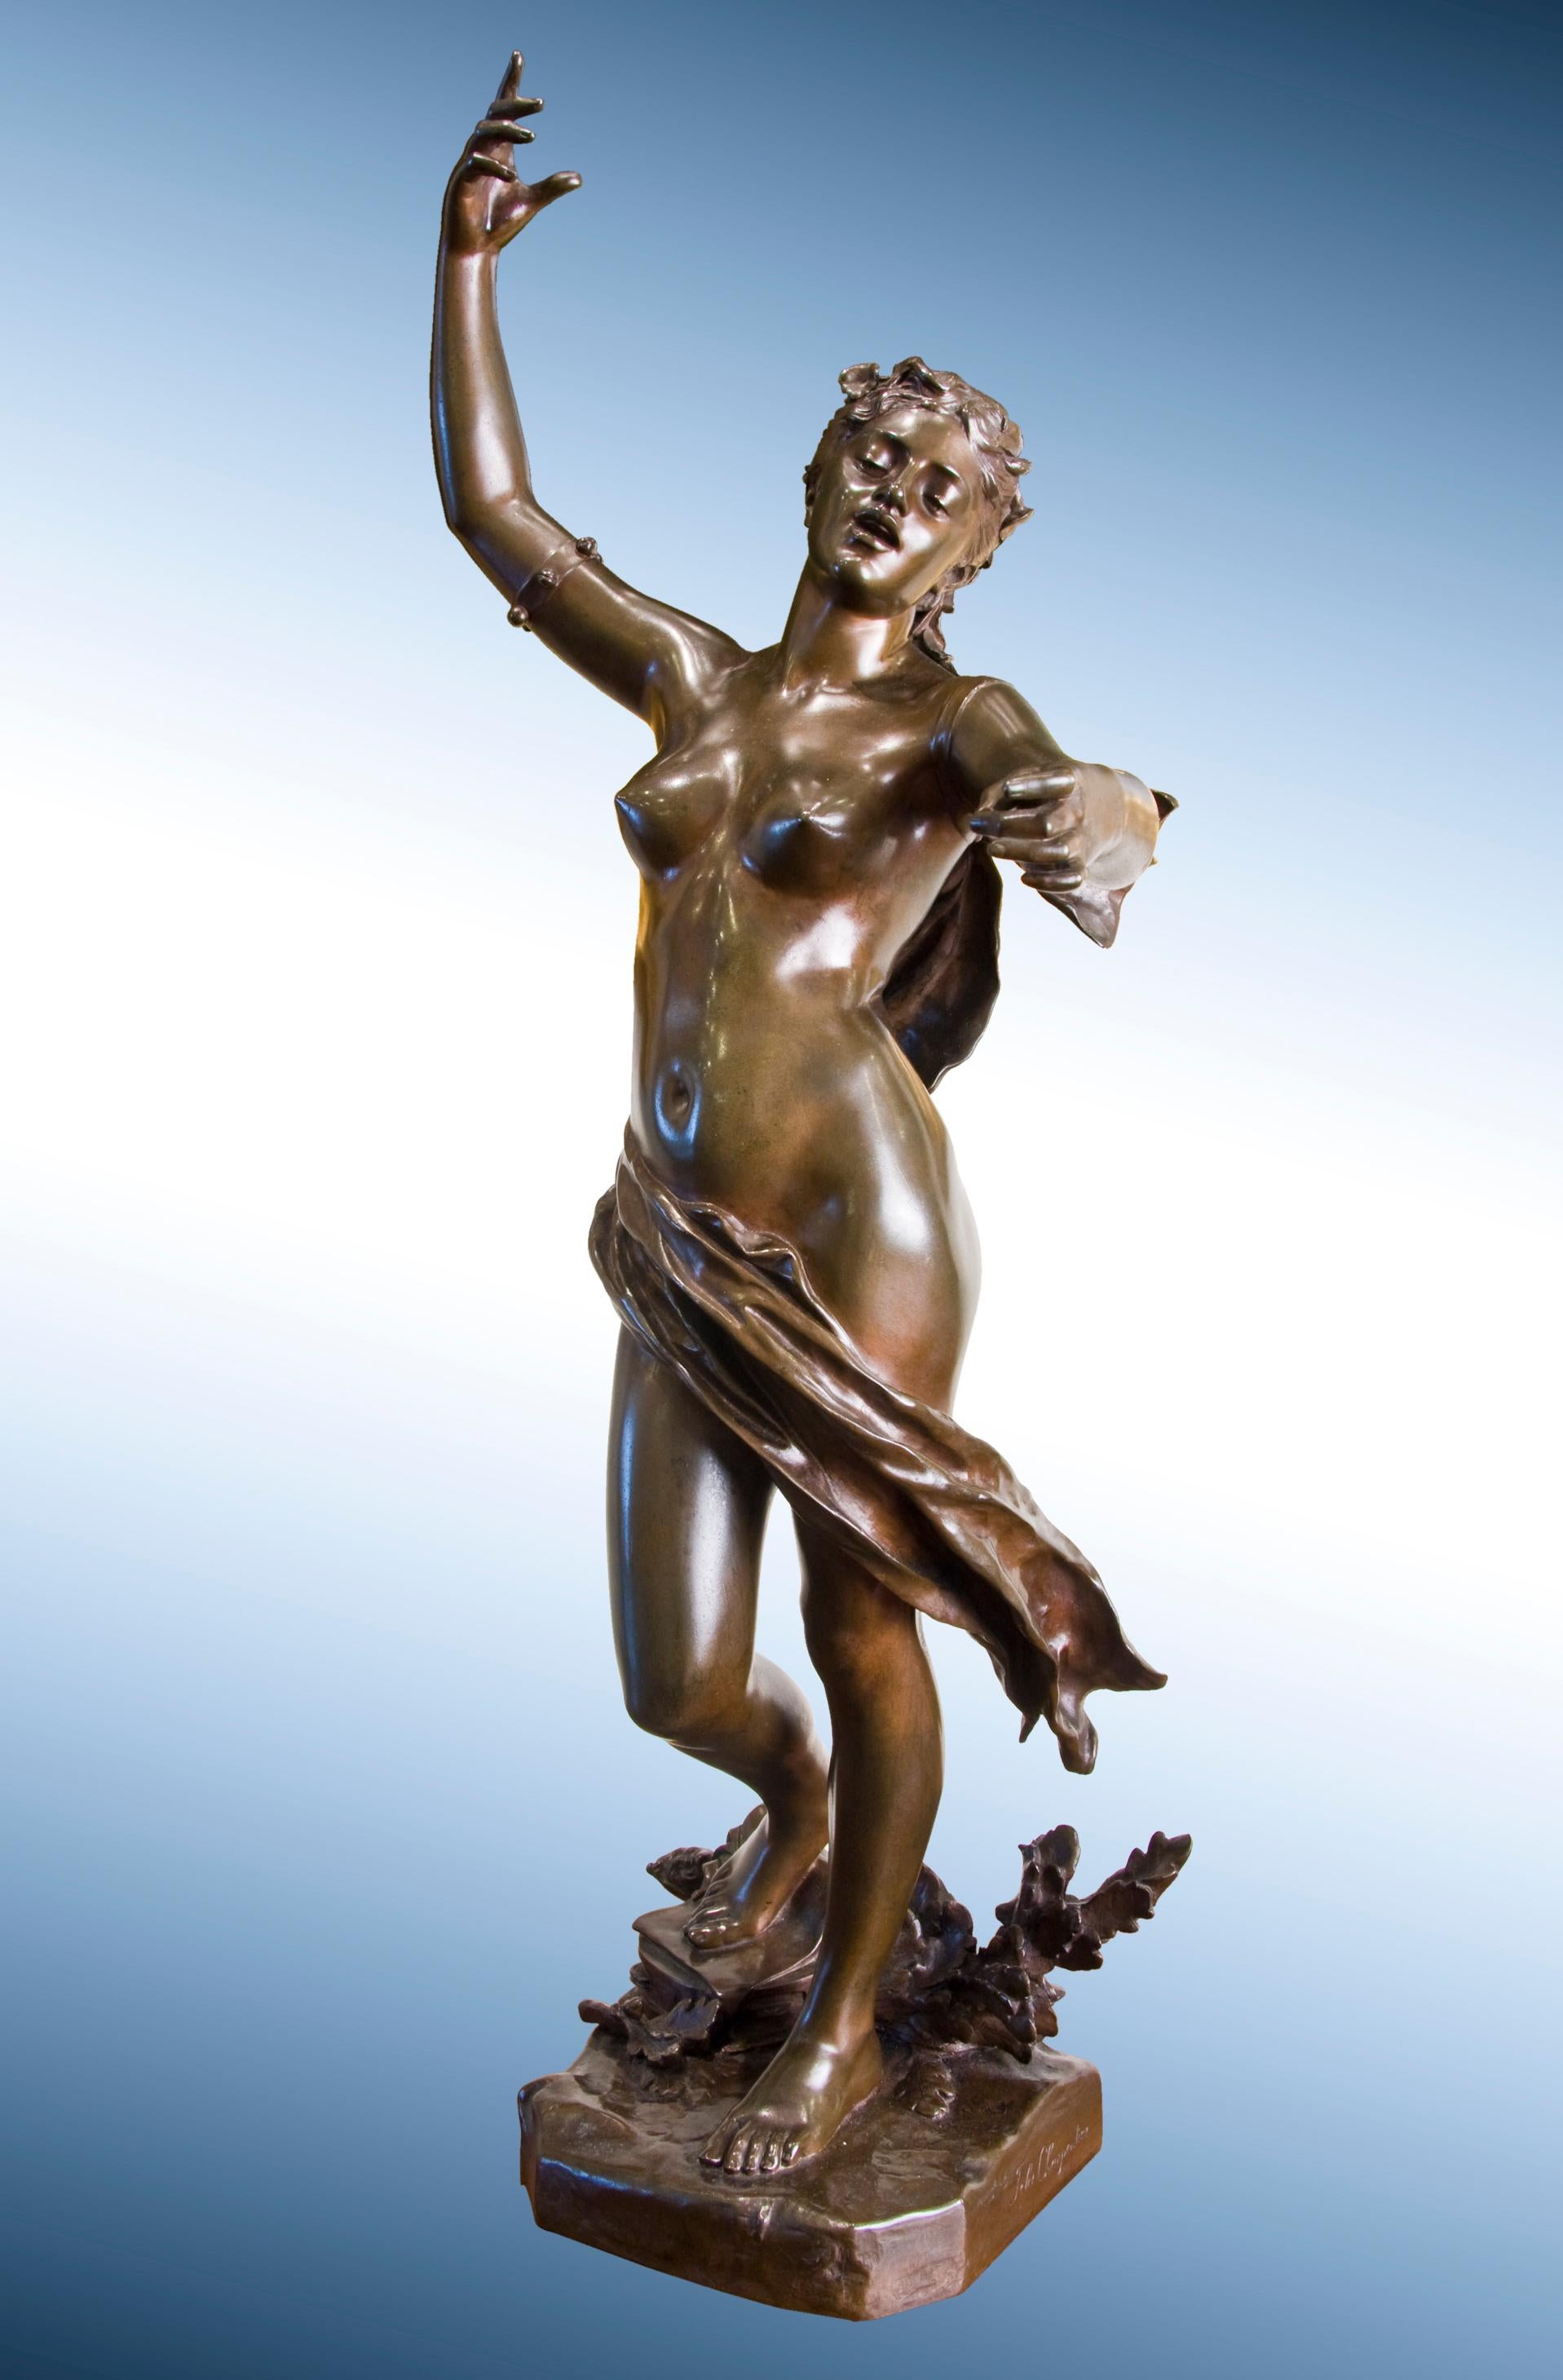 19th Century sculpture of Female Nude in Bronze, titled 